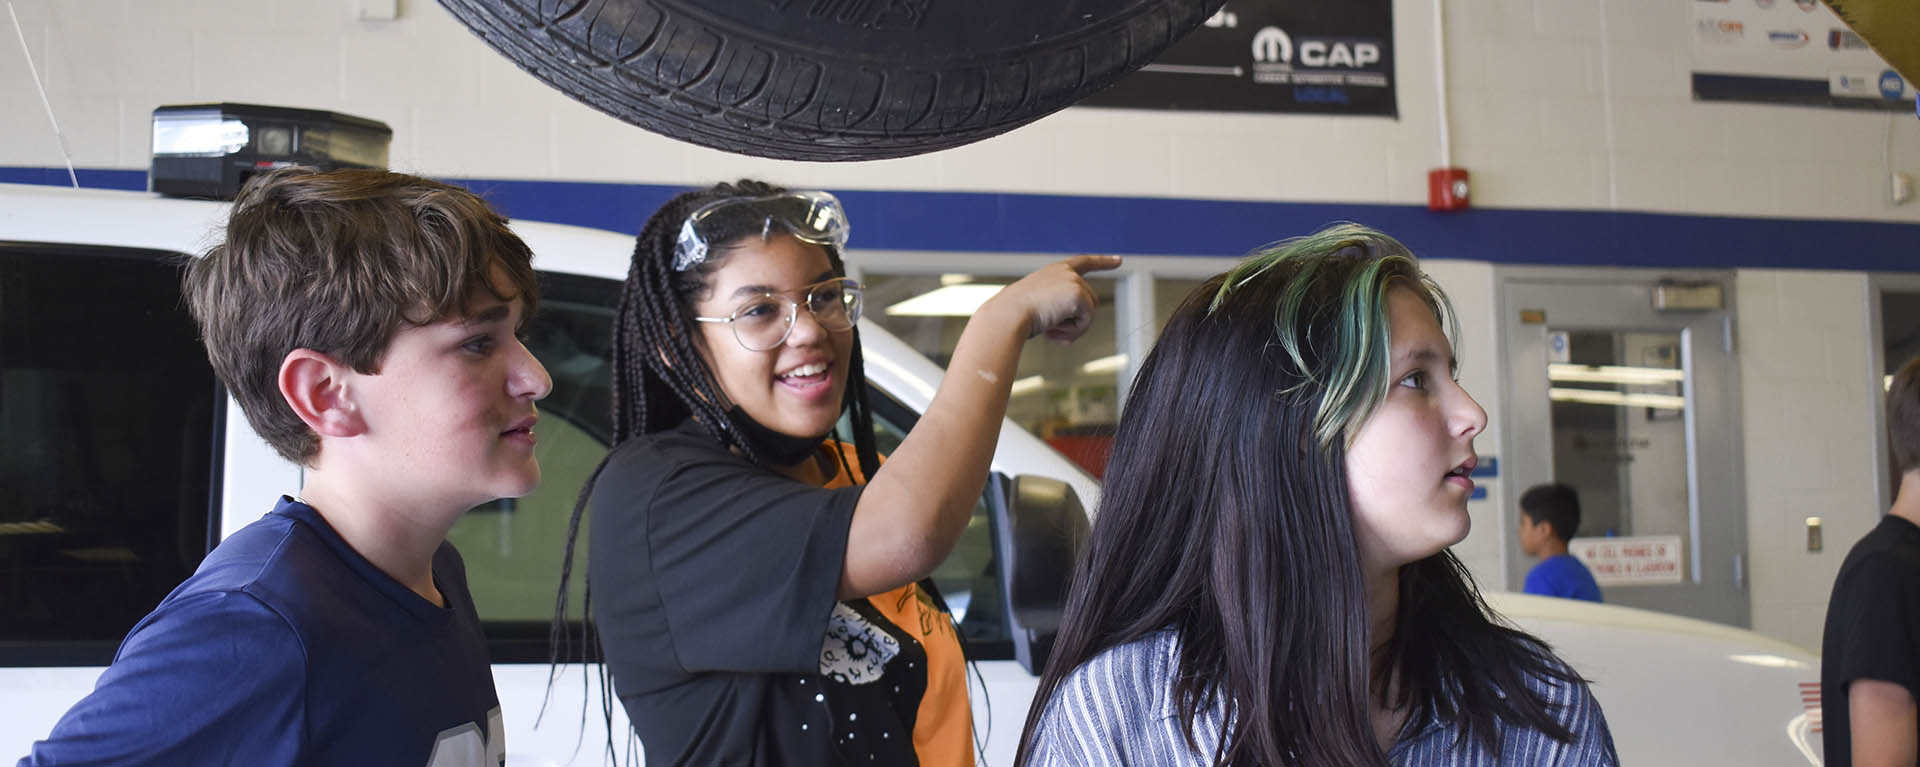 A student smiles and points while a car is suspended in the shop overhead.